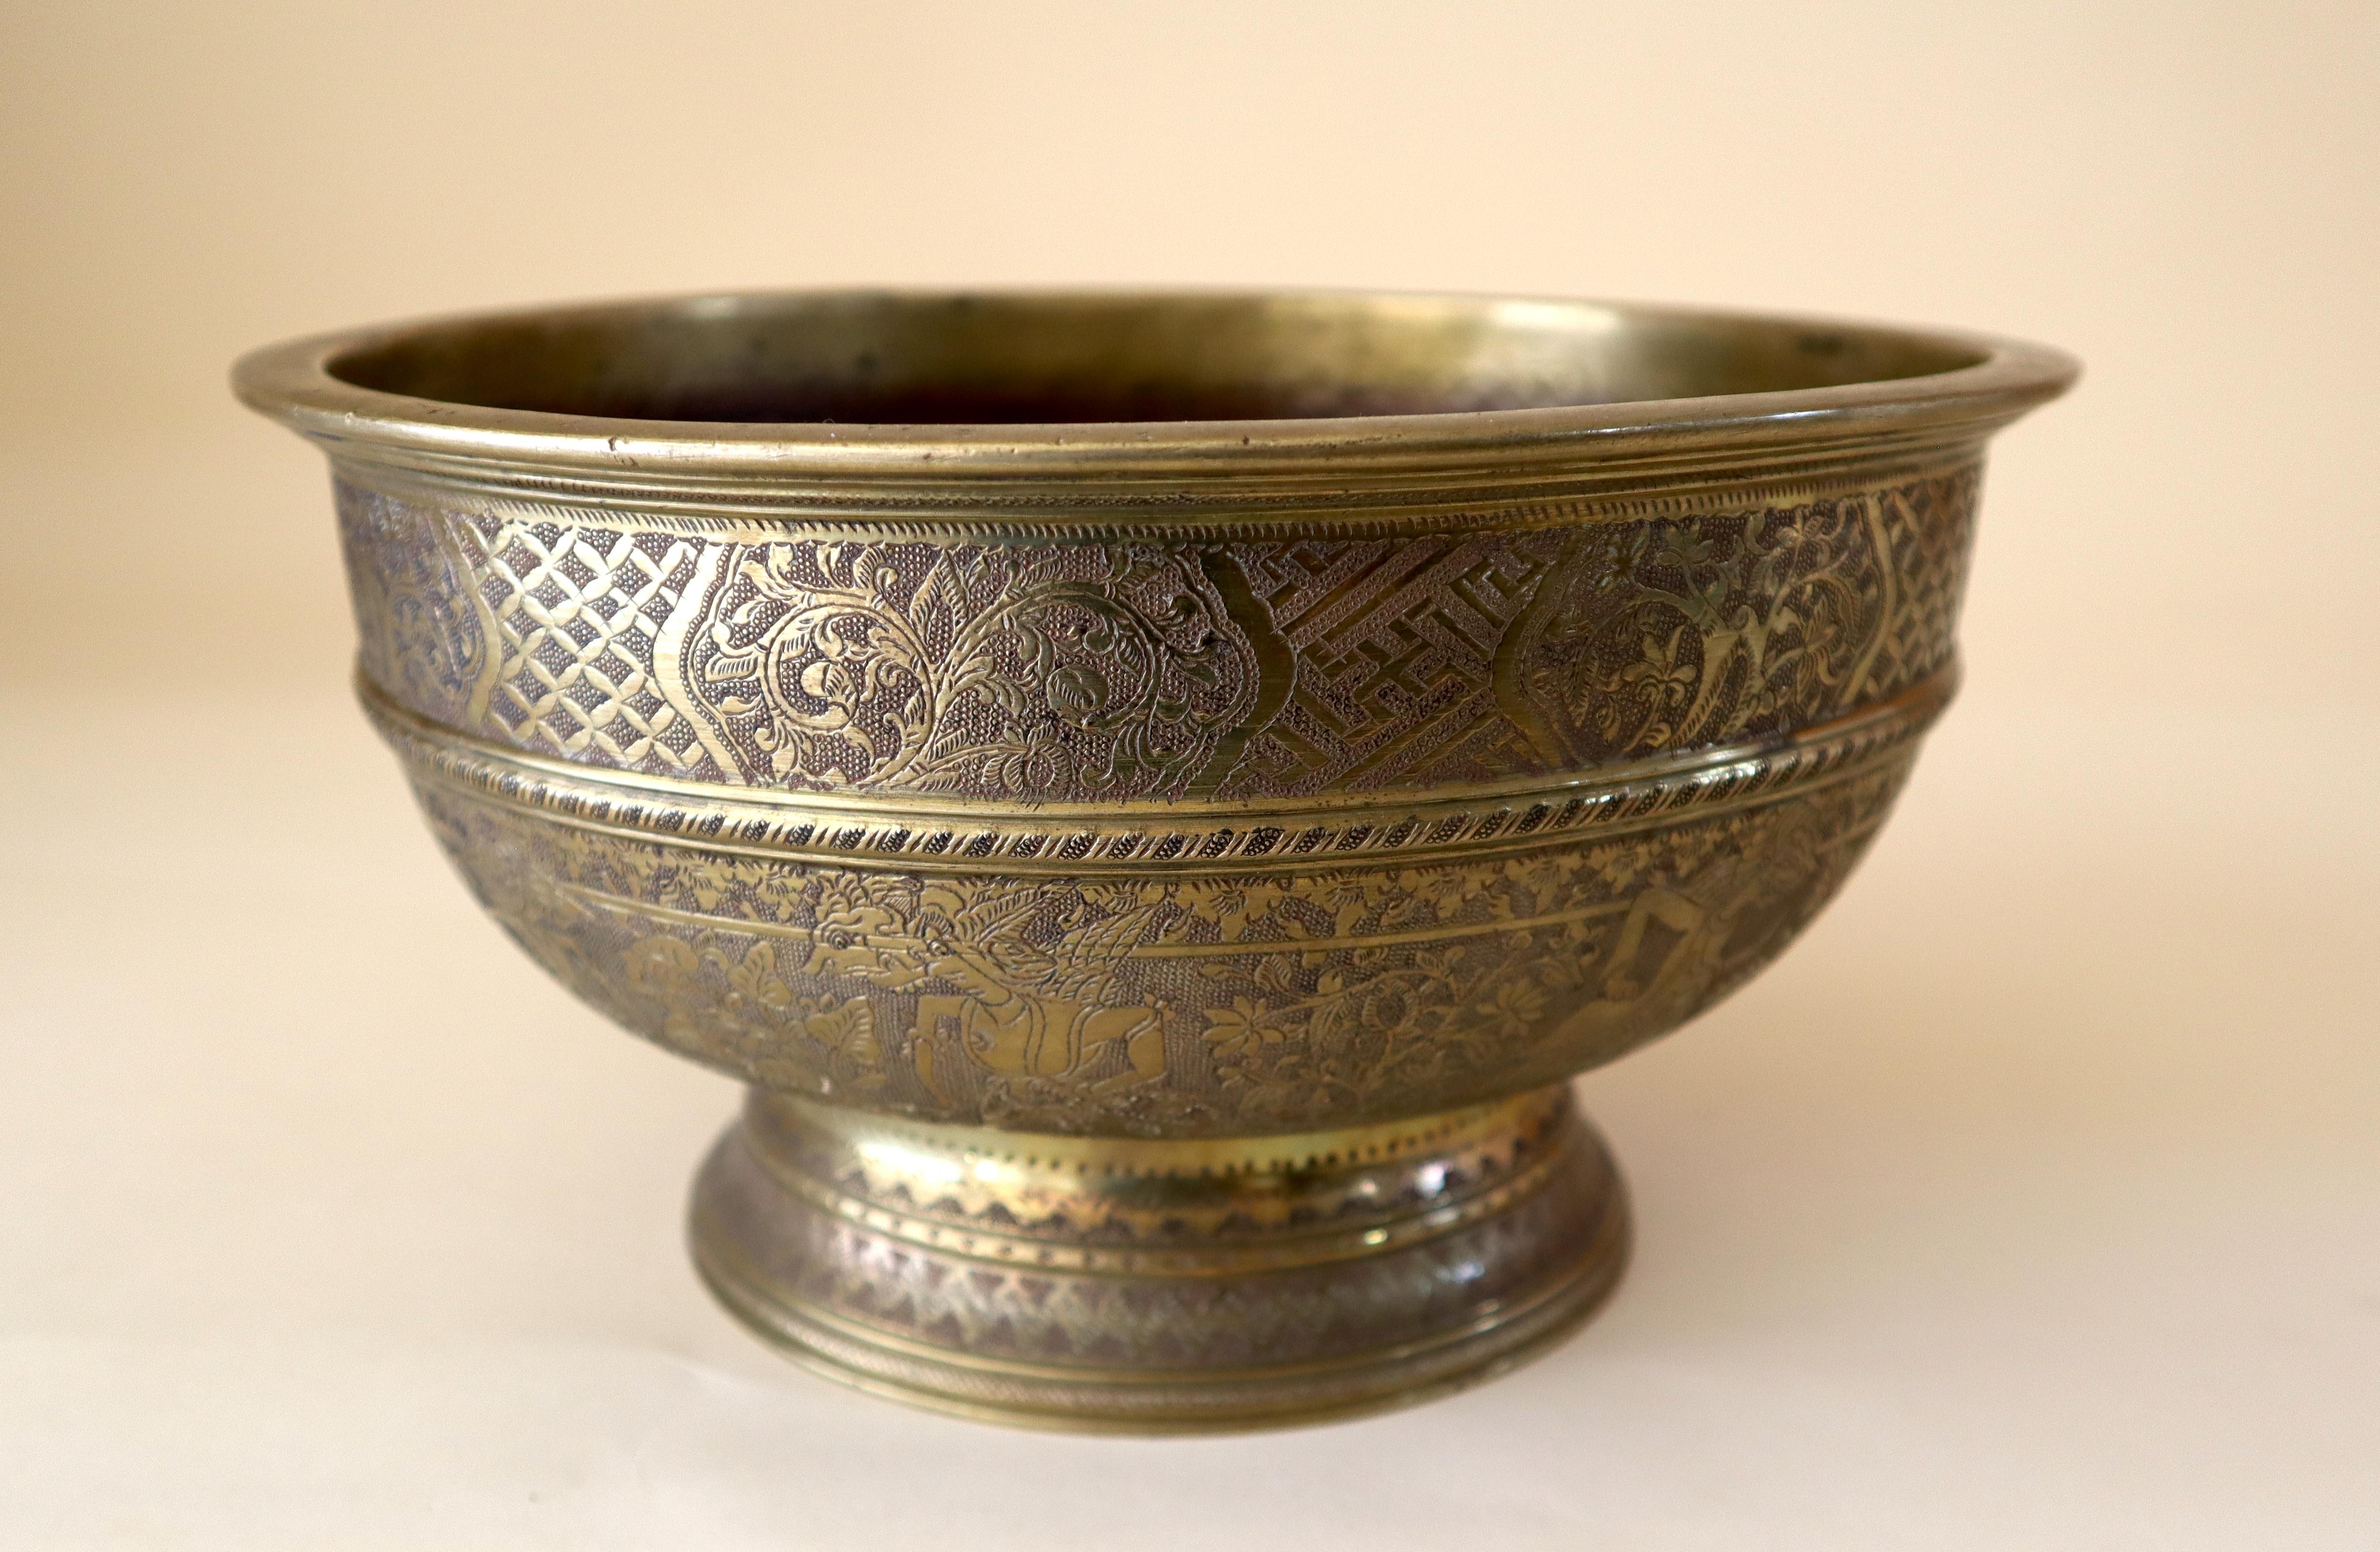 Large heavy bronze or brass bowl, Java, Indonesia, early 20th century. The entire exterior chased with an upper band of floral motifs and a lower band of traditional Indonesian mythological characters most often encountered as shadow puppets (called